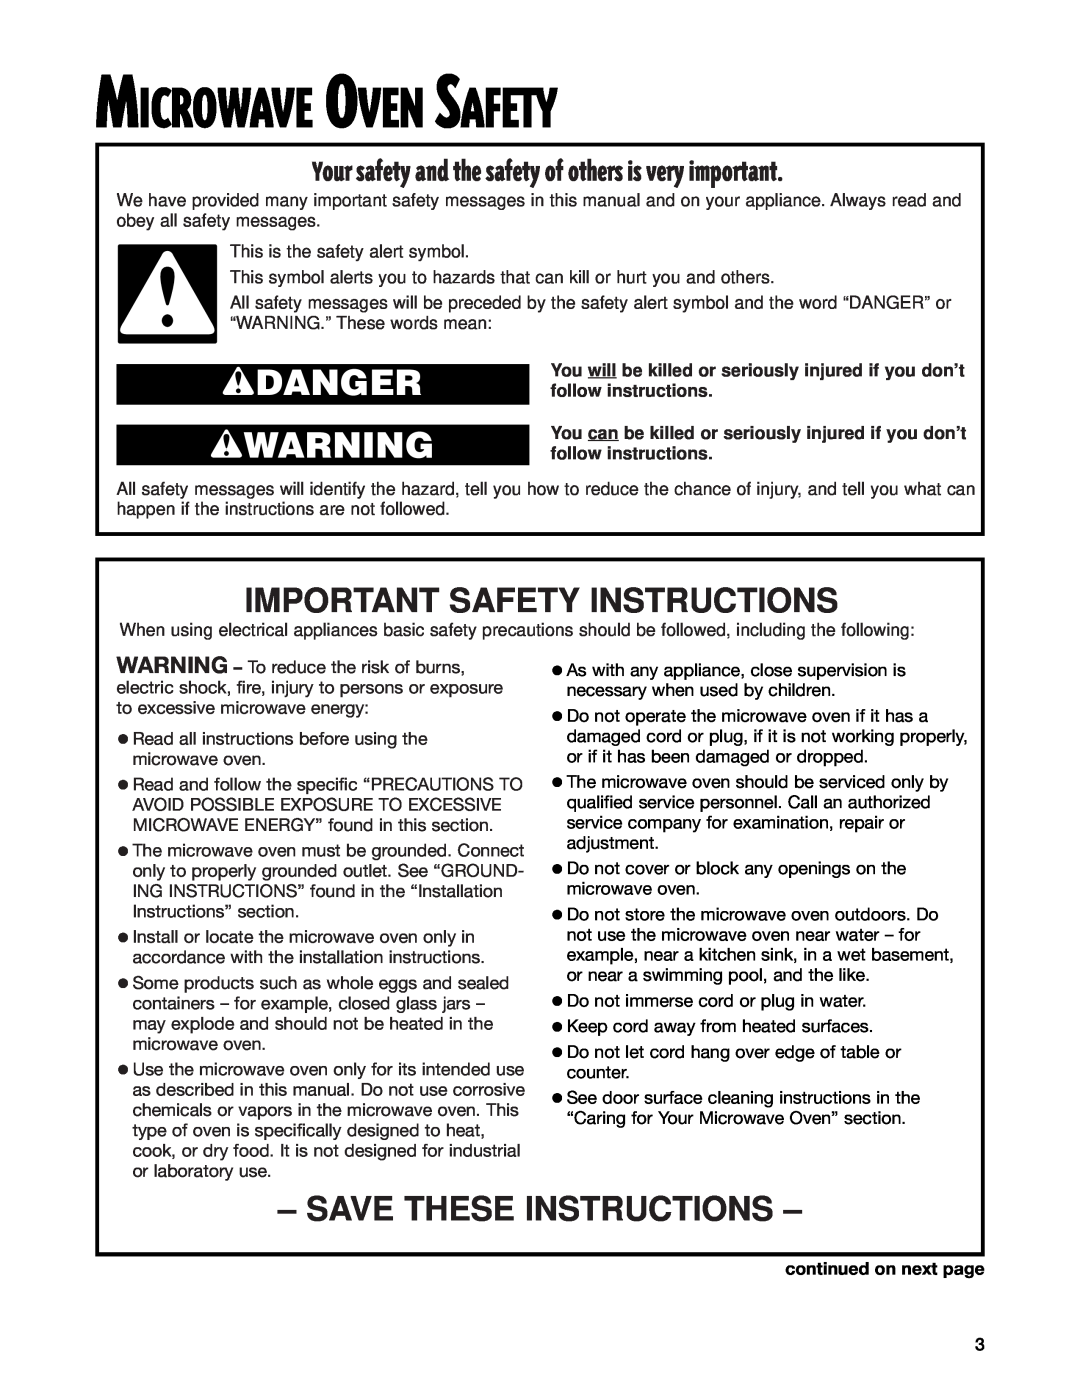 Whirlpool MT1130SG Microwave Oven Safety, Important Safety Instructions, Save These Instructions, wDANGER wWARNING 